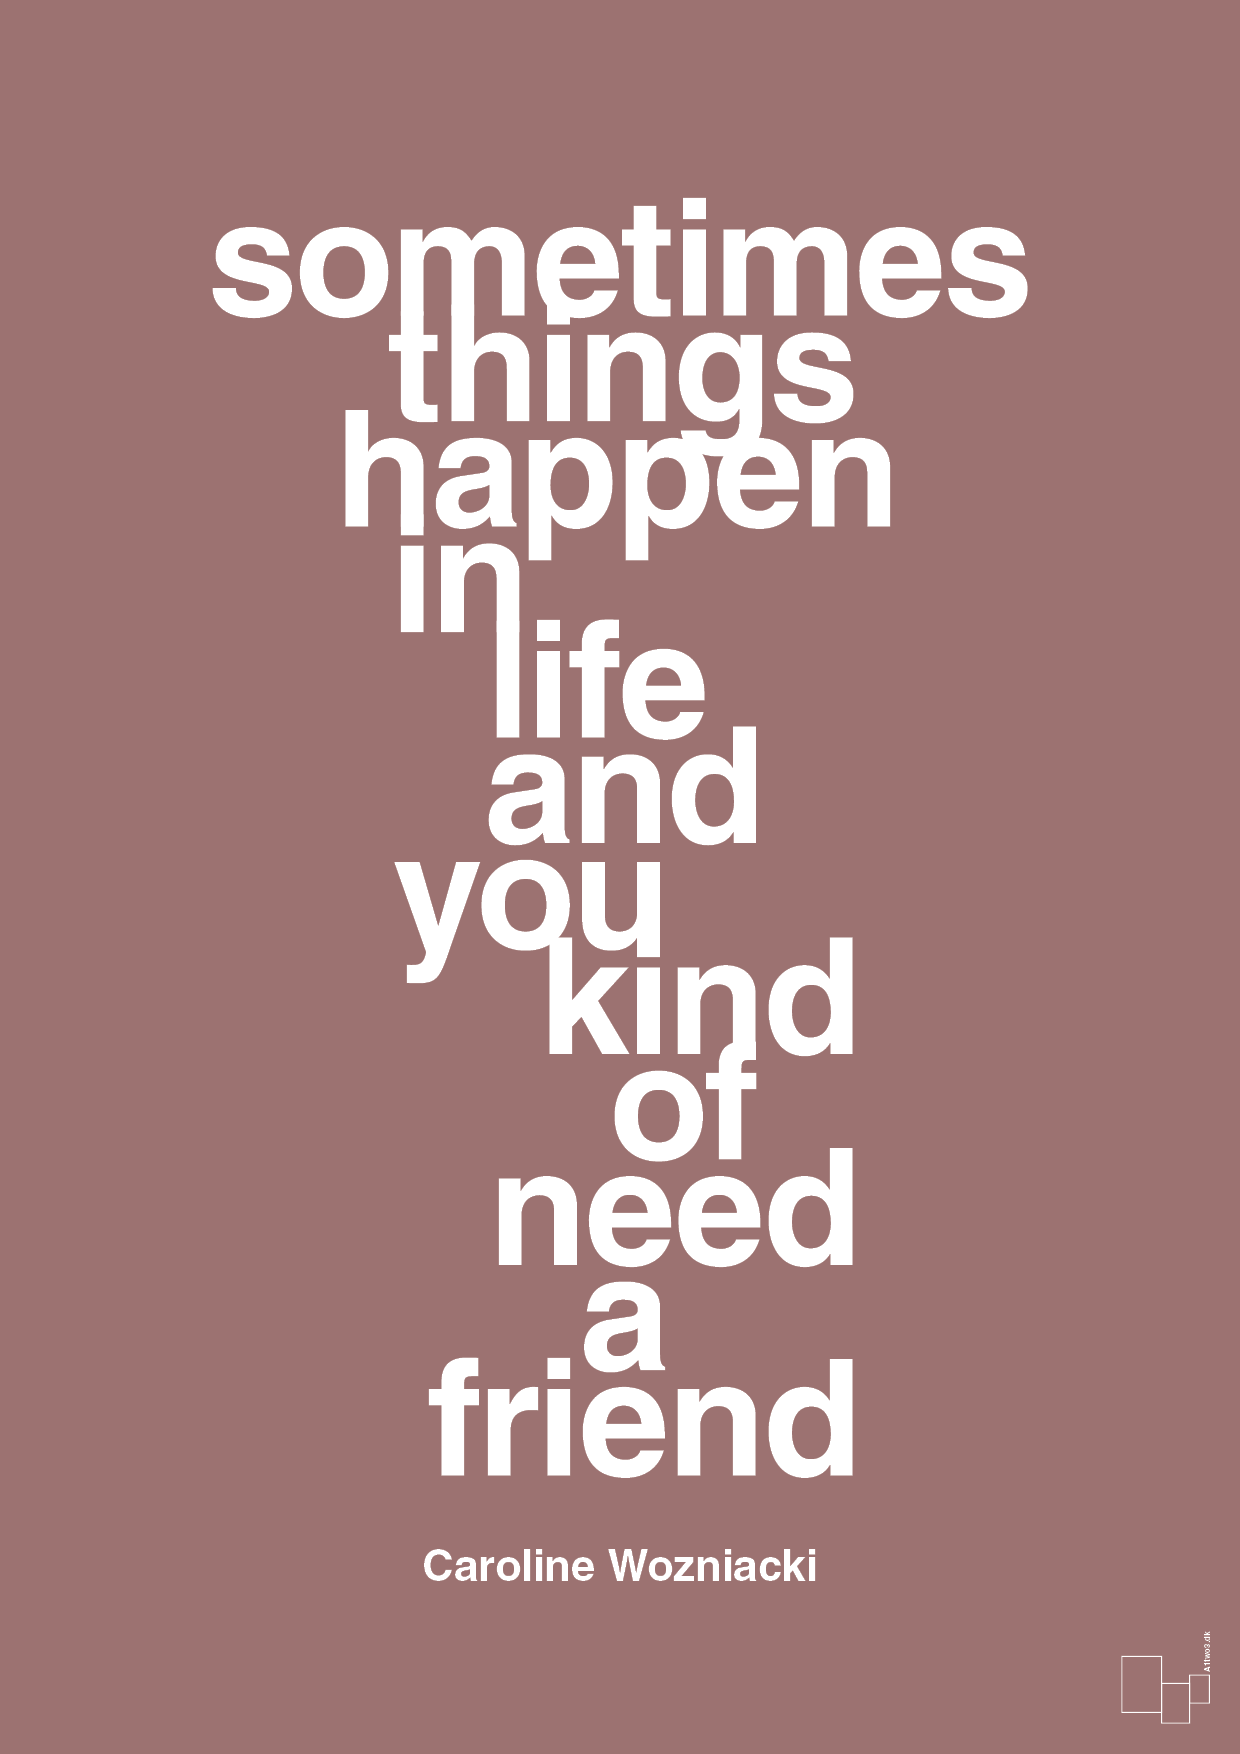 sometimes things happen in life and you kind of need a friend - Plakat med Citater i Plum